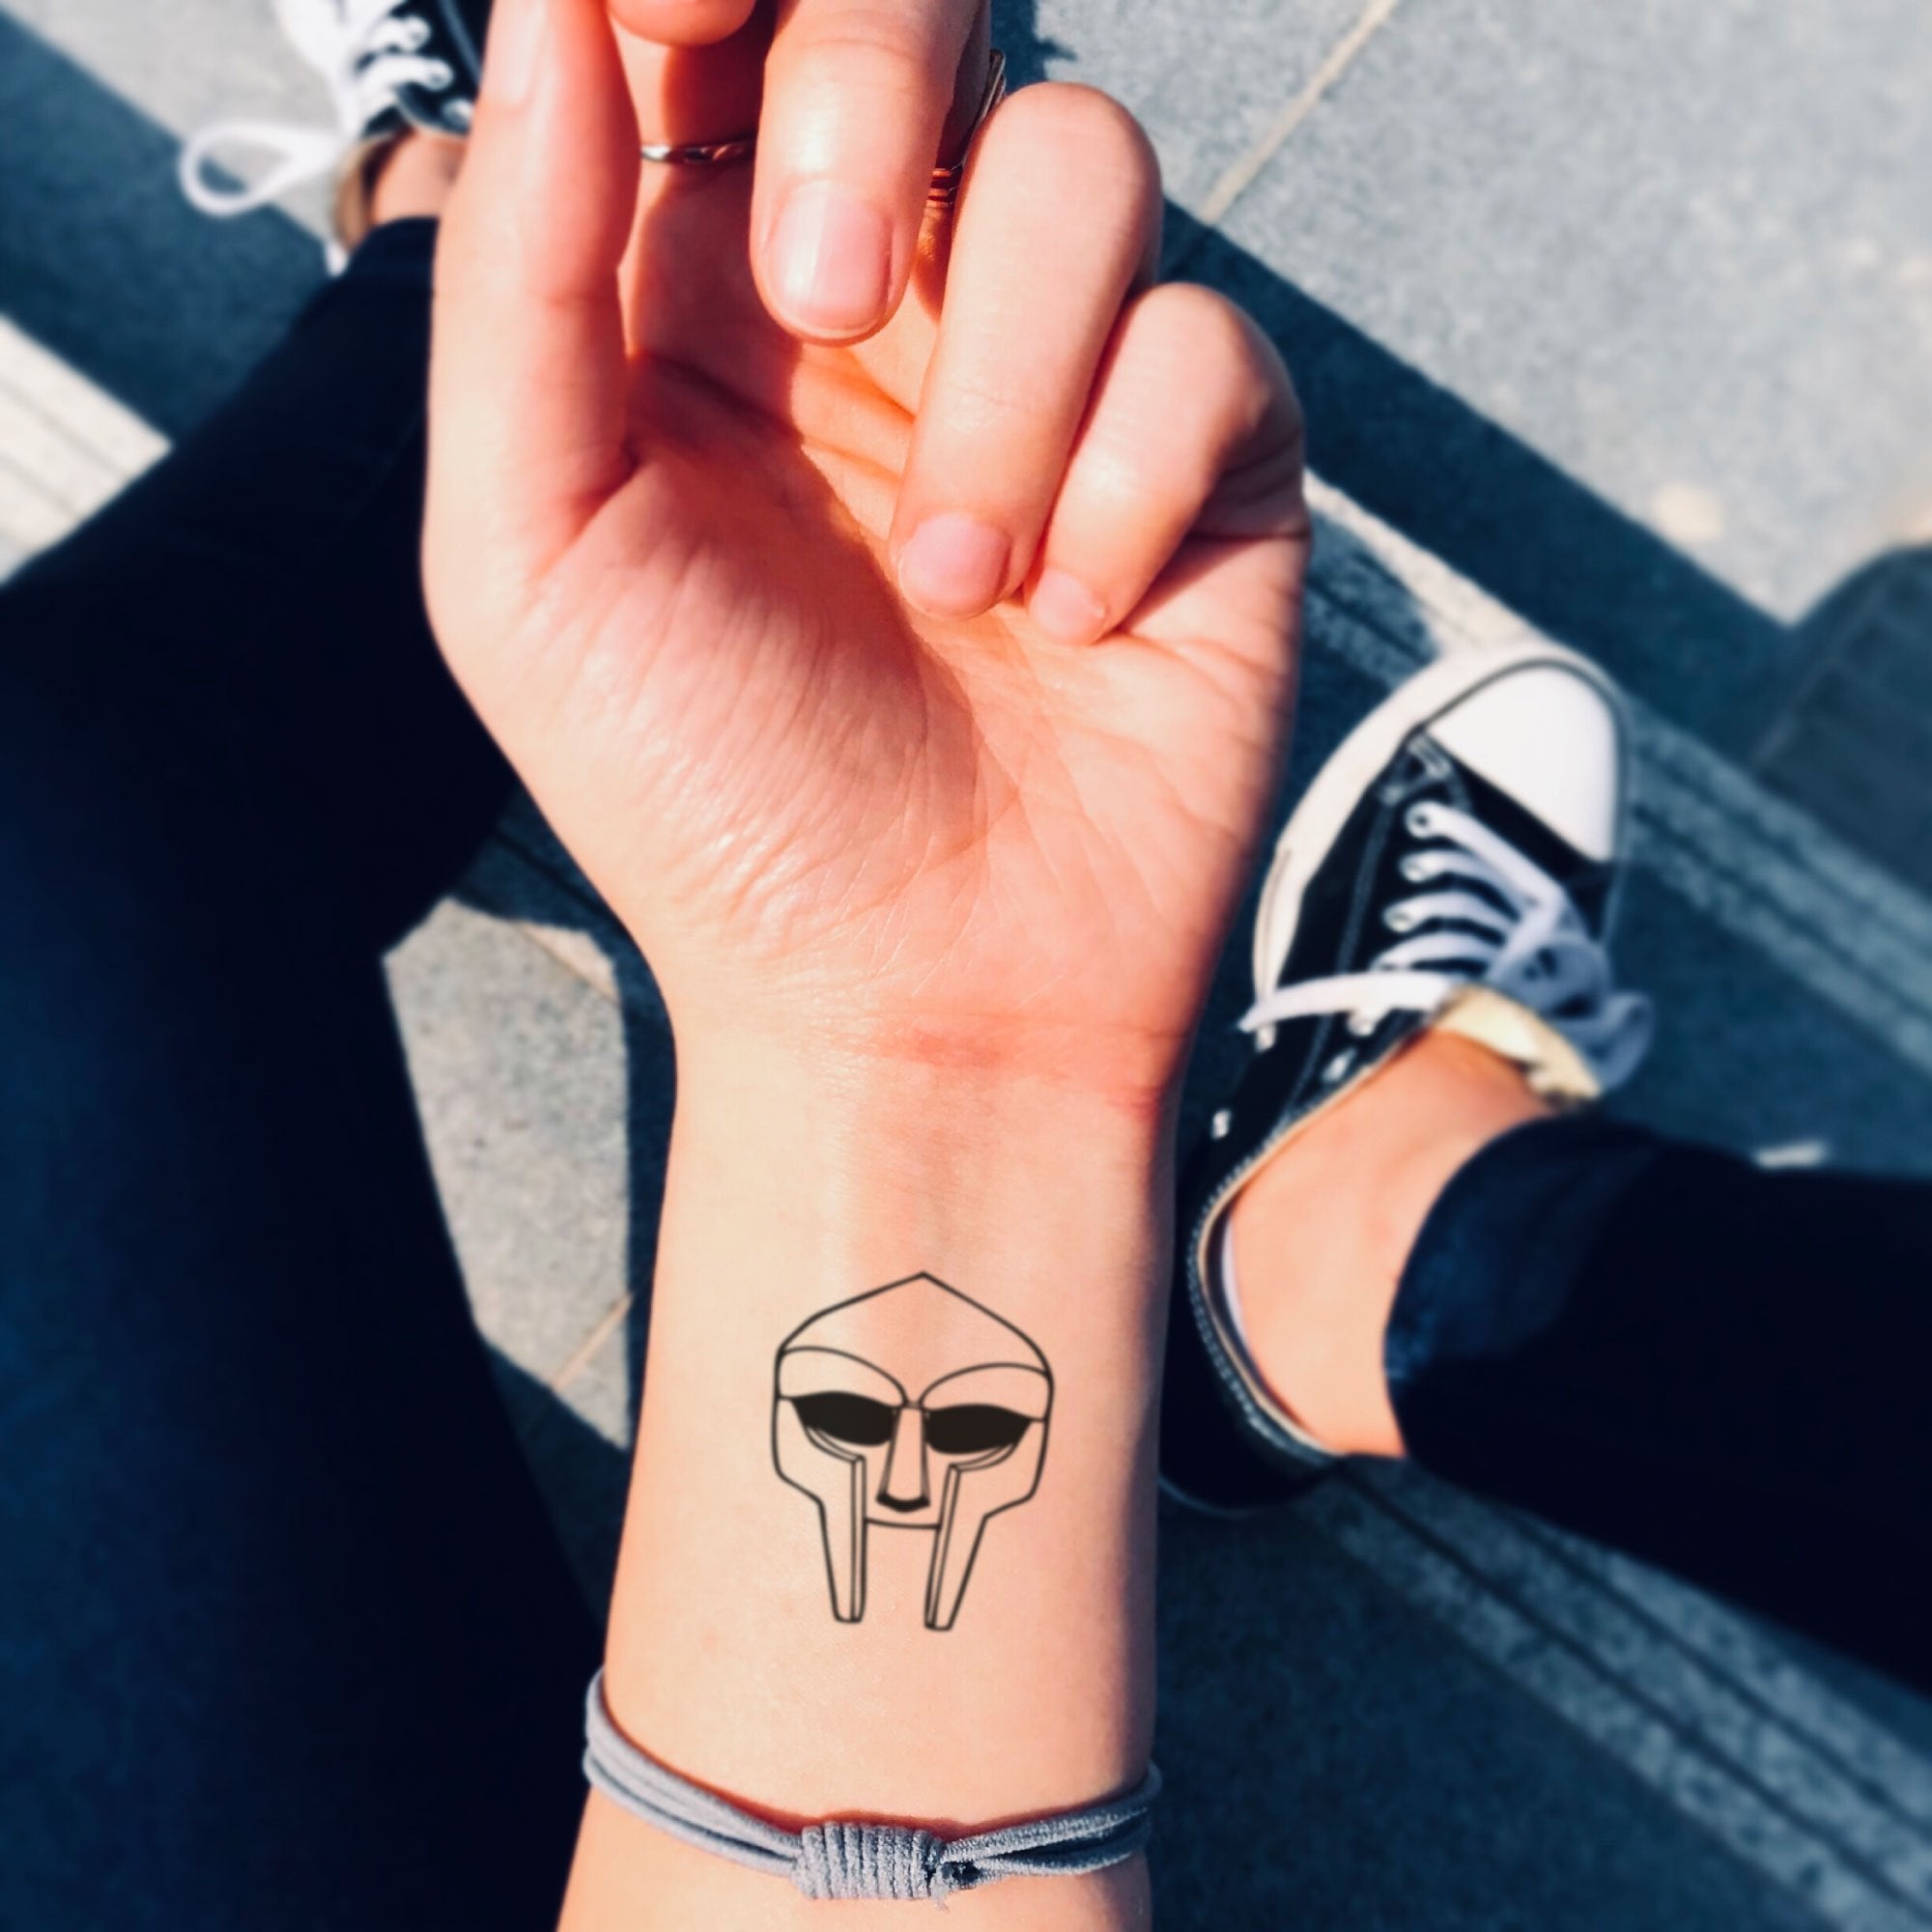 Share more than 65 doom symbol tattoo latest - in.cdgdbentre